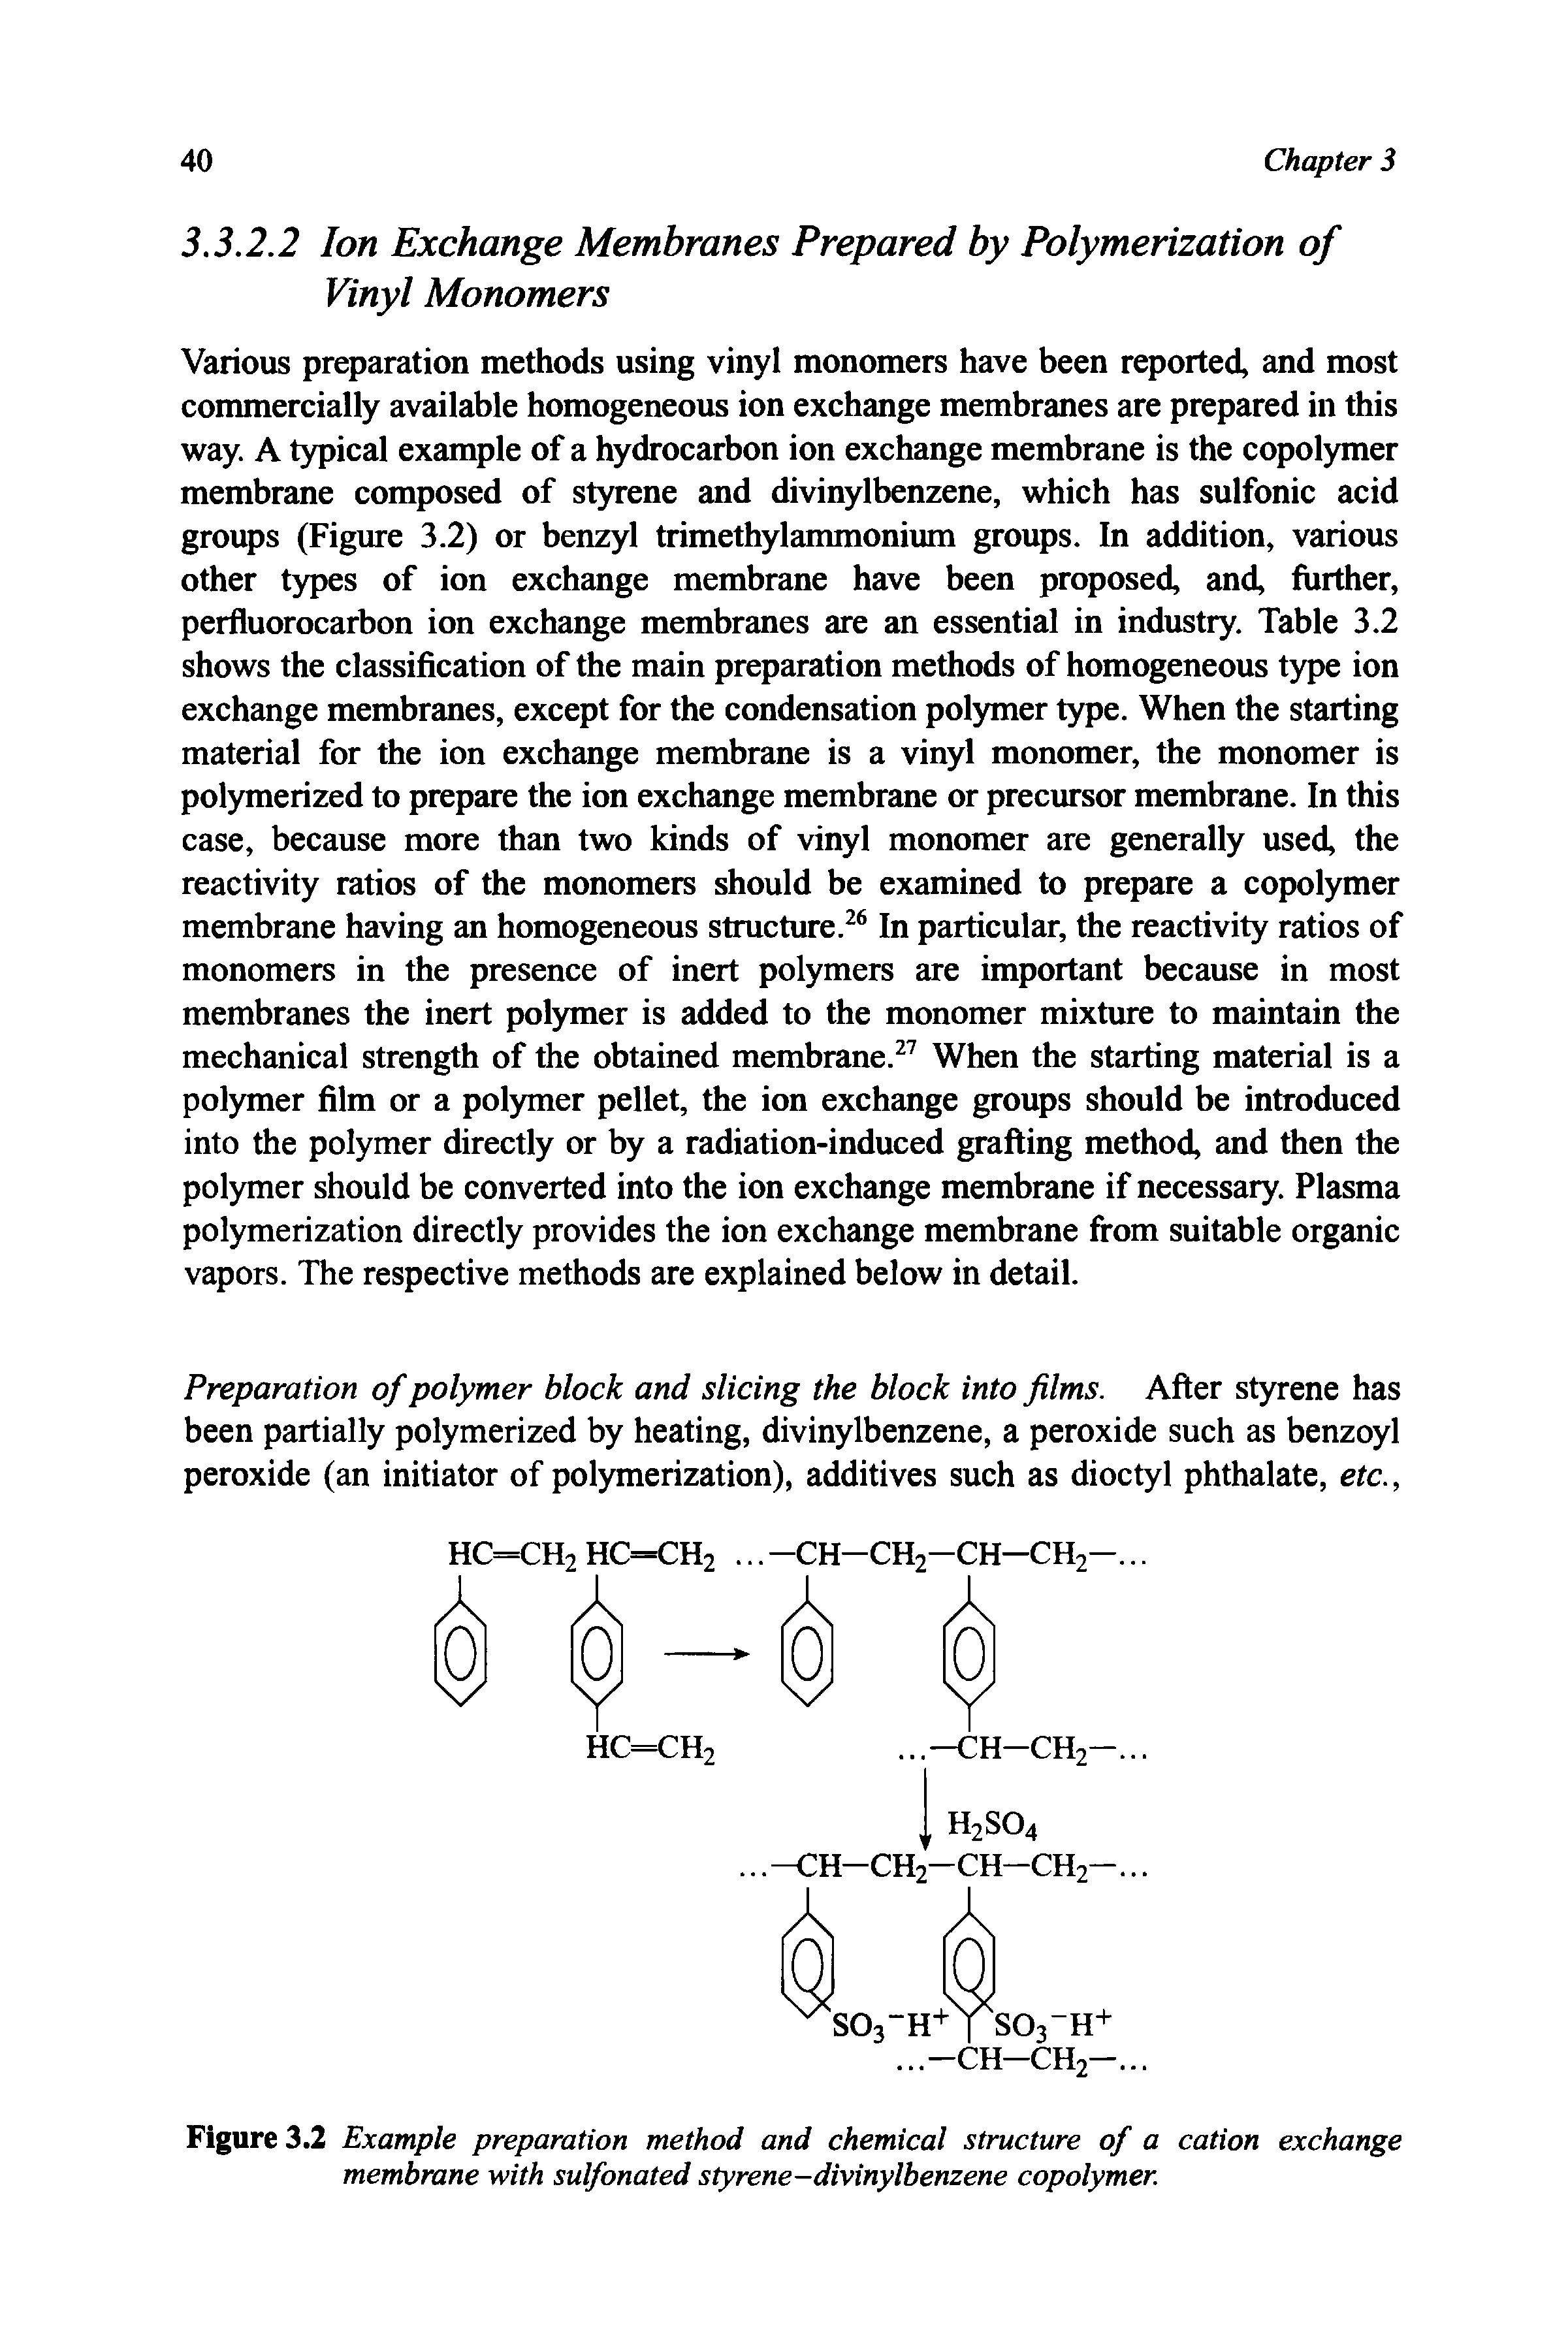 Figure 3.2 Example preparation method and chemical structure of a cation exchange membrane with sulfonated styrene-divinylbenzene copolymer.